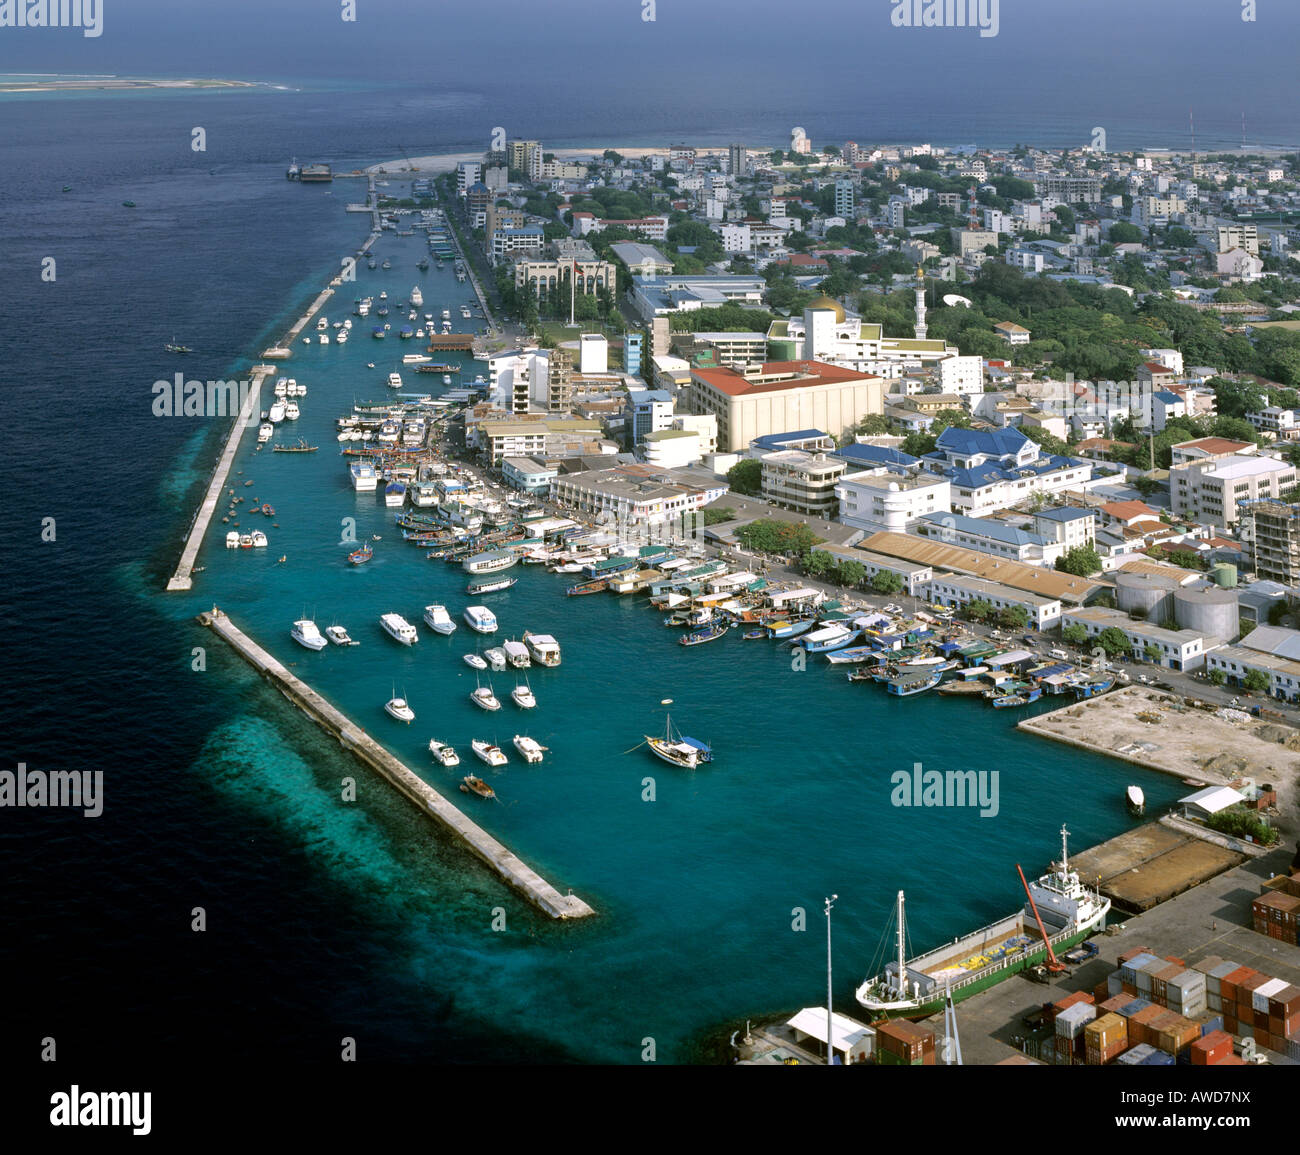 Aerial view of harbour, Friday Mosque with minaret and golden dome, Male (Dhivehi), Maldives, Indian Ocean Stock Photo